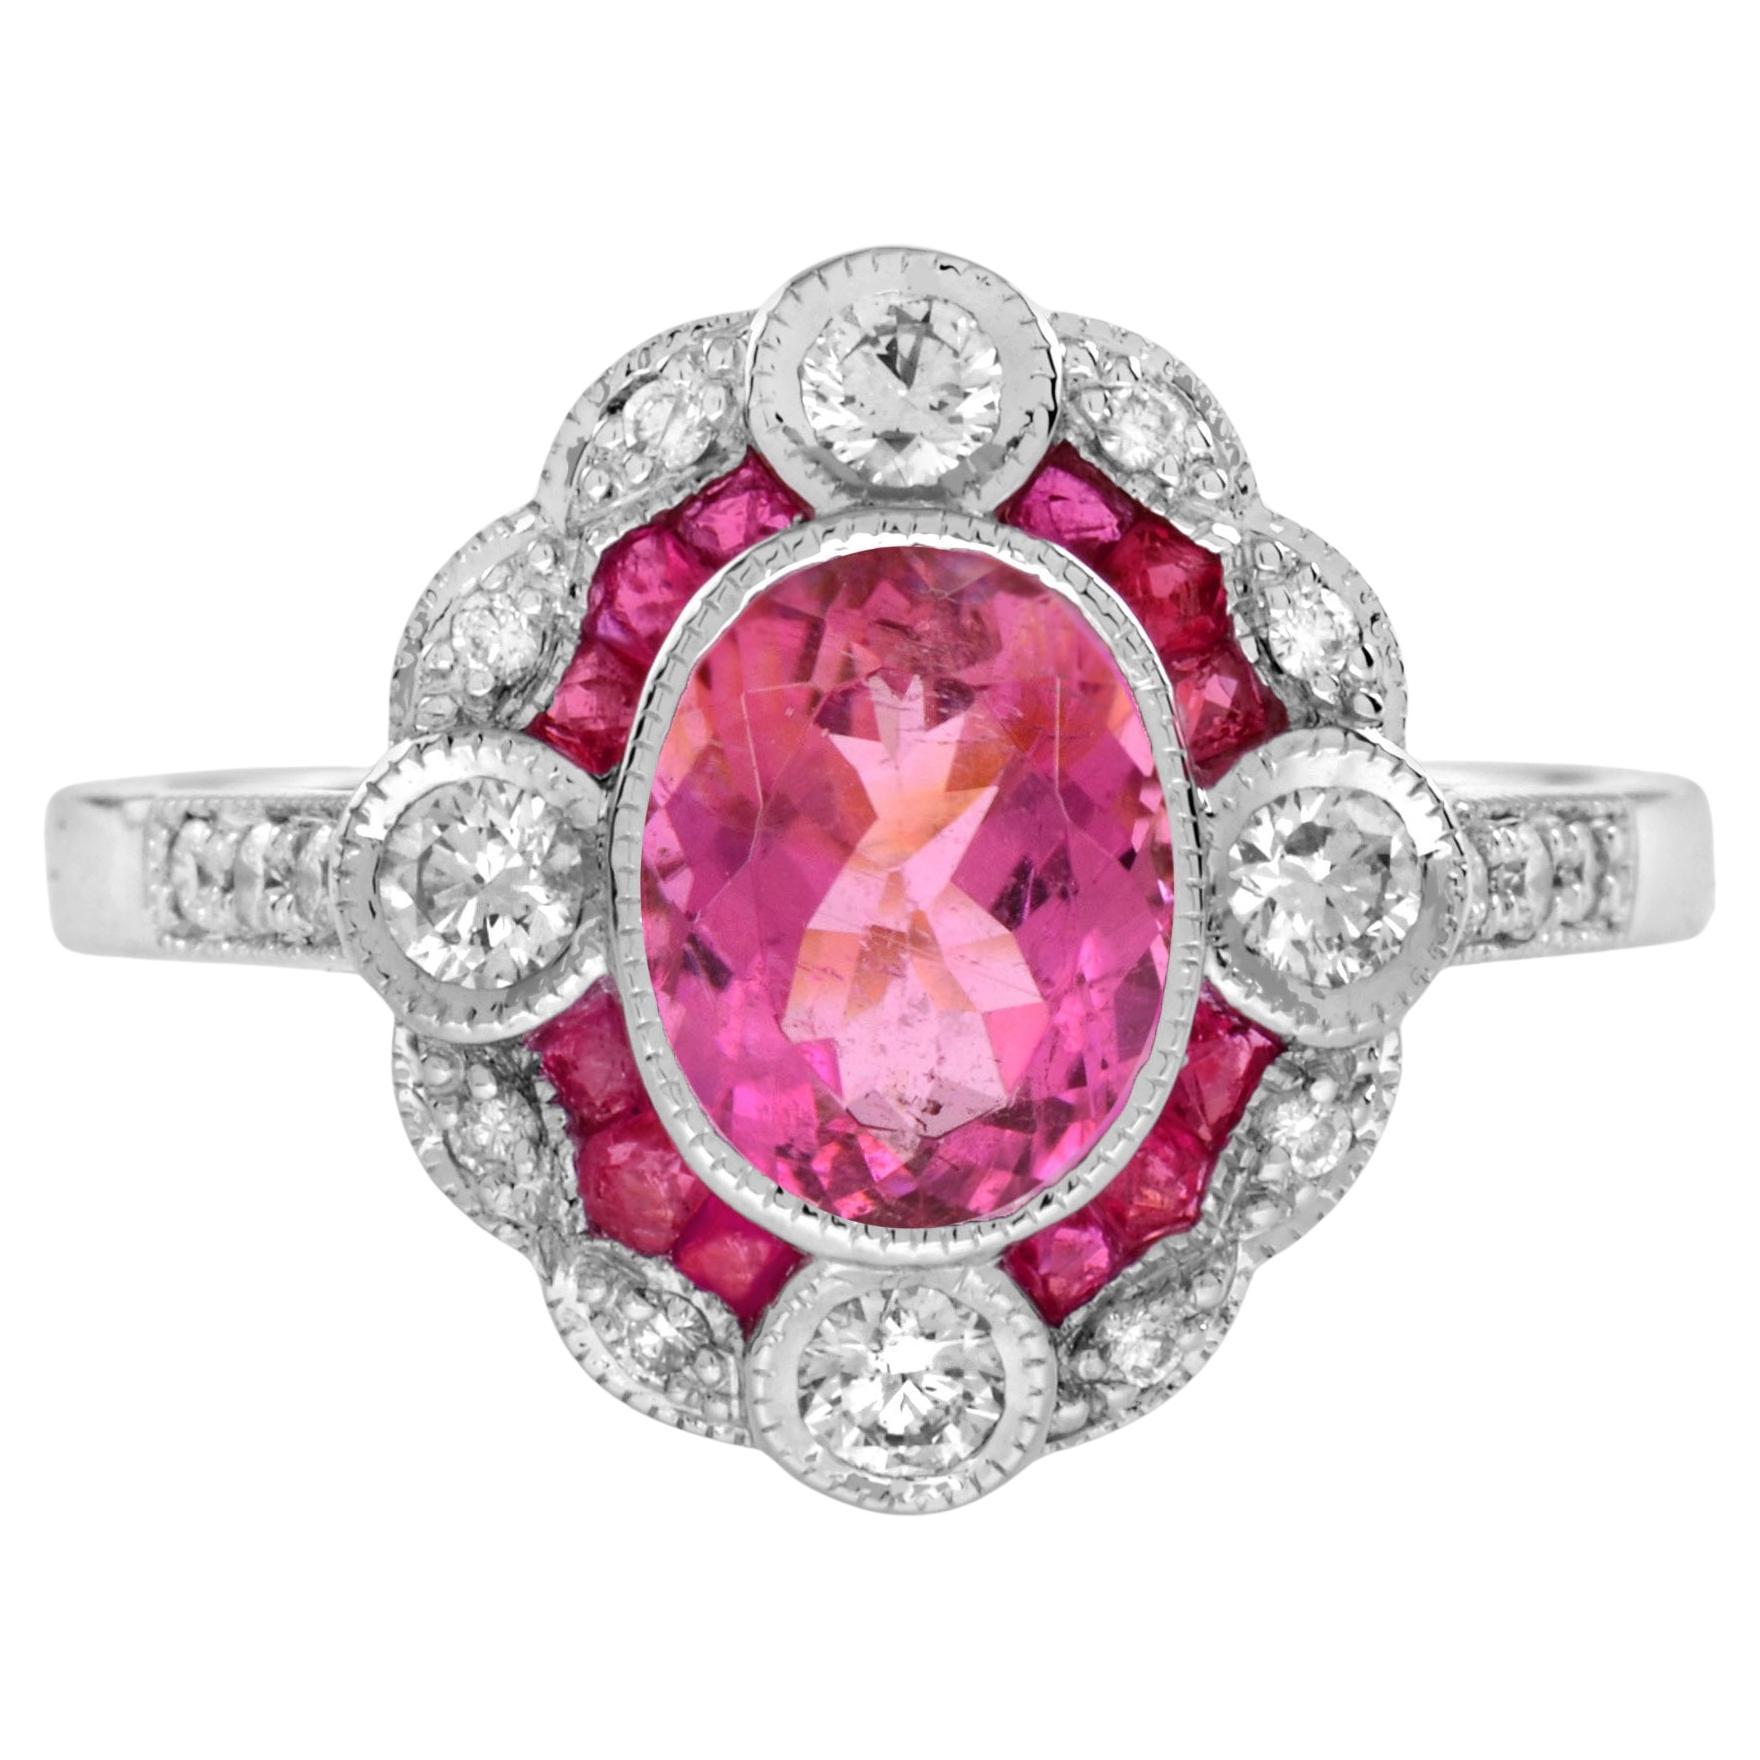 Pink Tourmaline Ruby Diamond Art Deco Style Engagement Ring in 18K White Gold